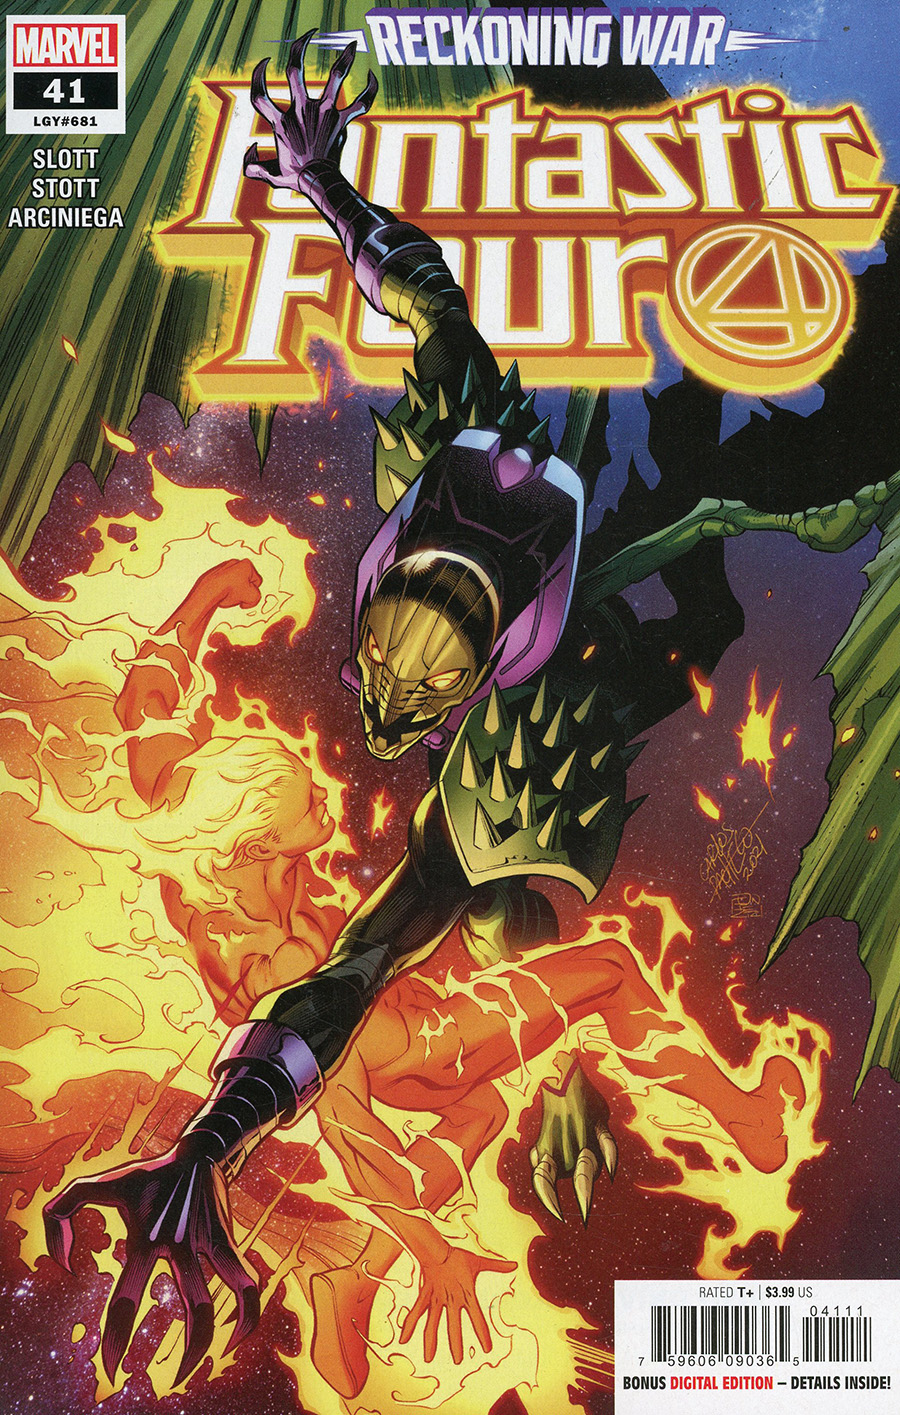 Fantastic Four Vol 6 #41 Cover A Regular Carlos Pacheco Cover (Reckoning War Tie-In)